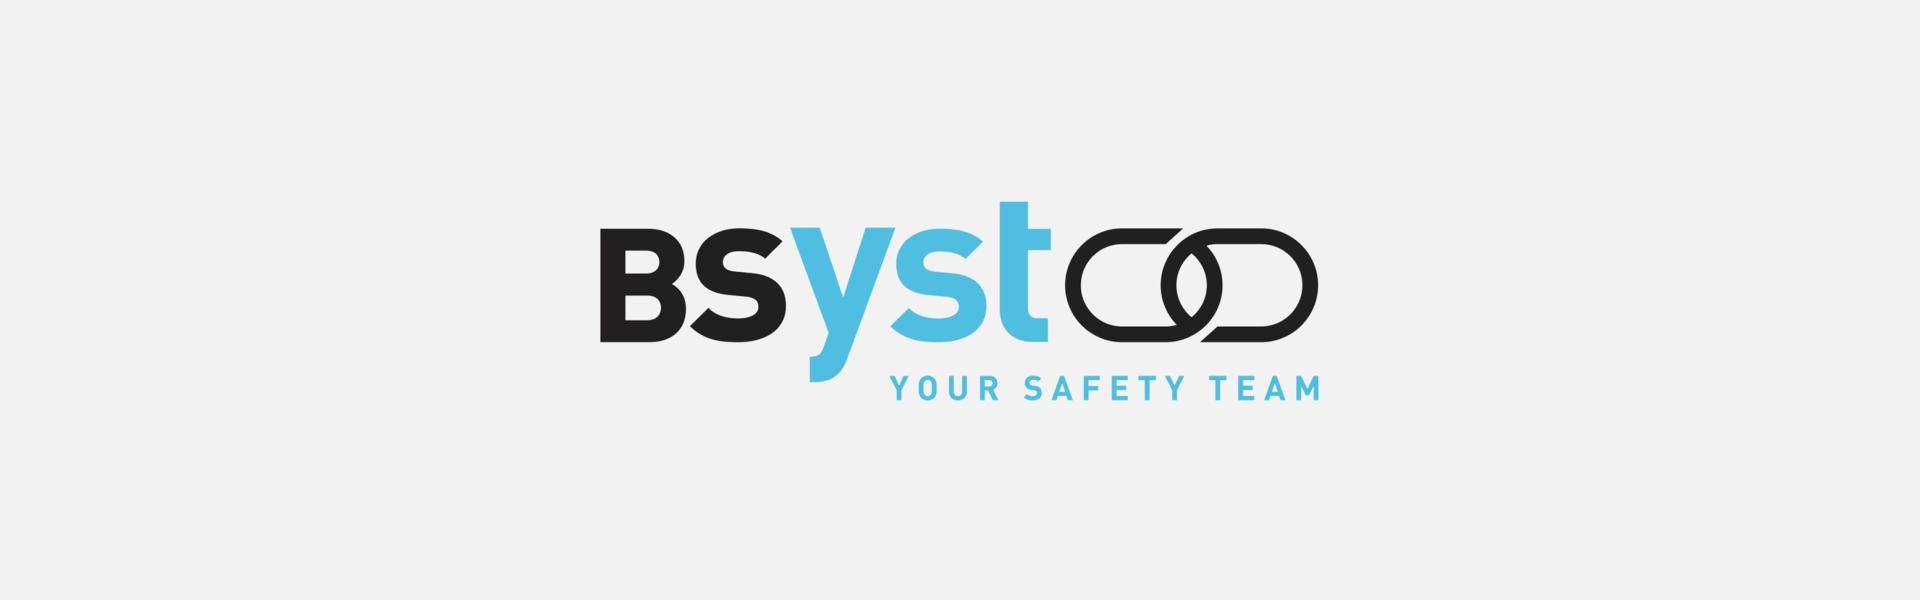 Cablesteel announces the Partner BSyst